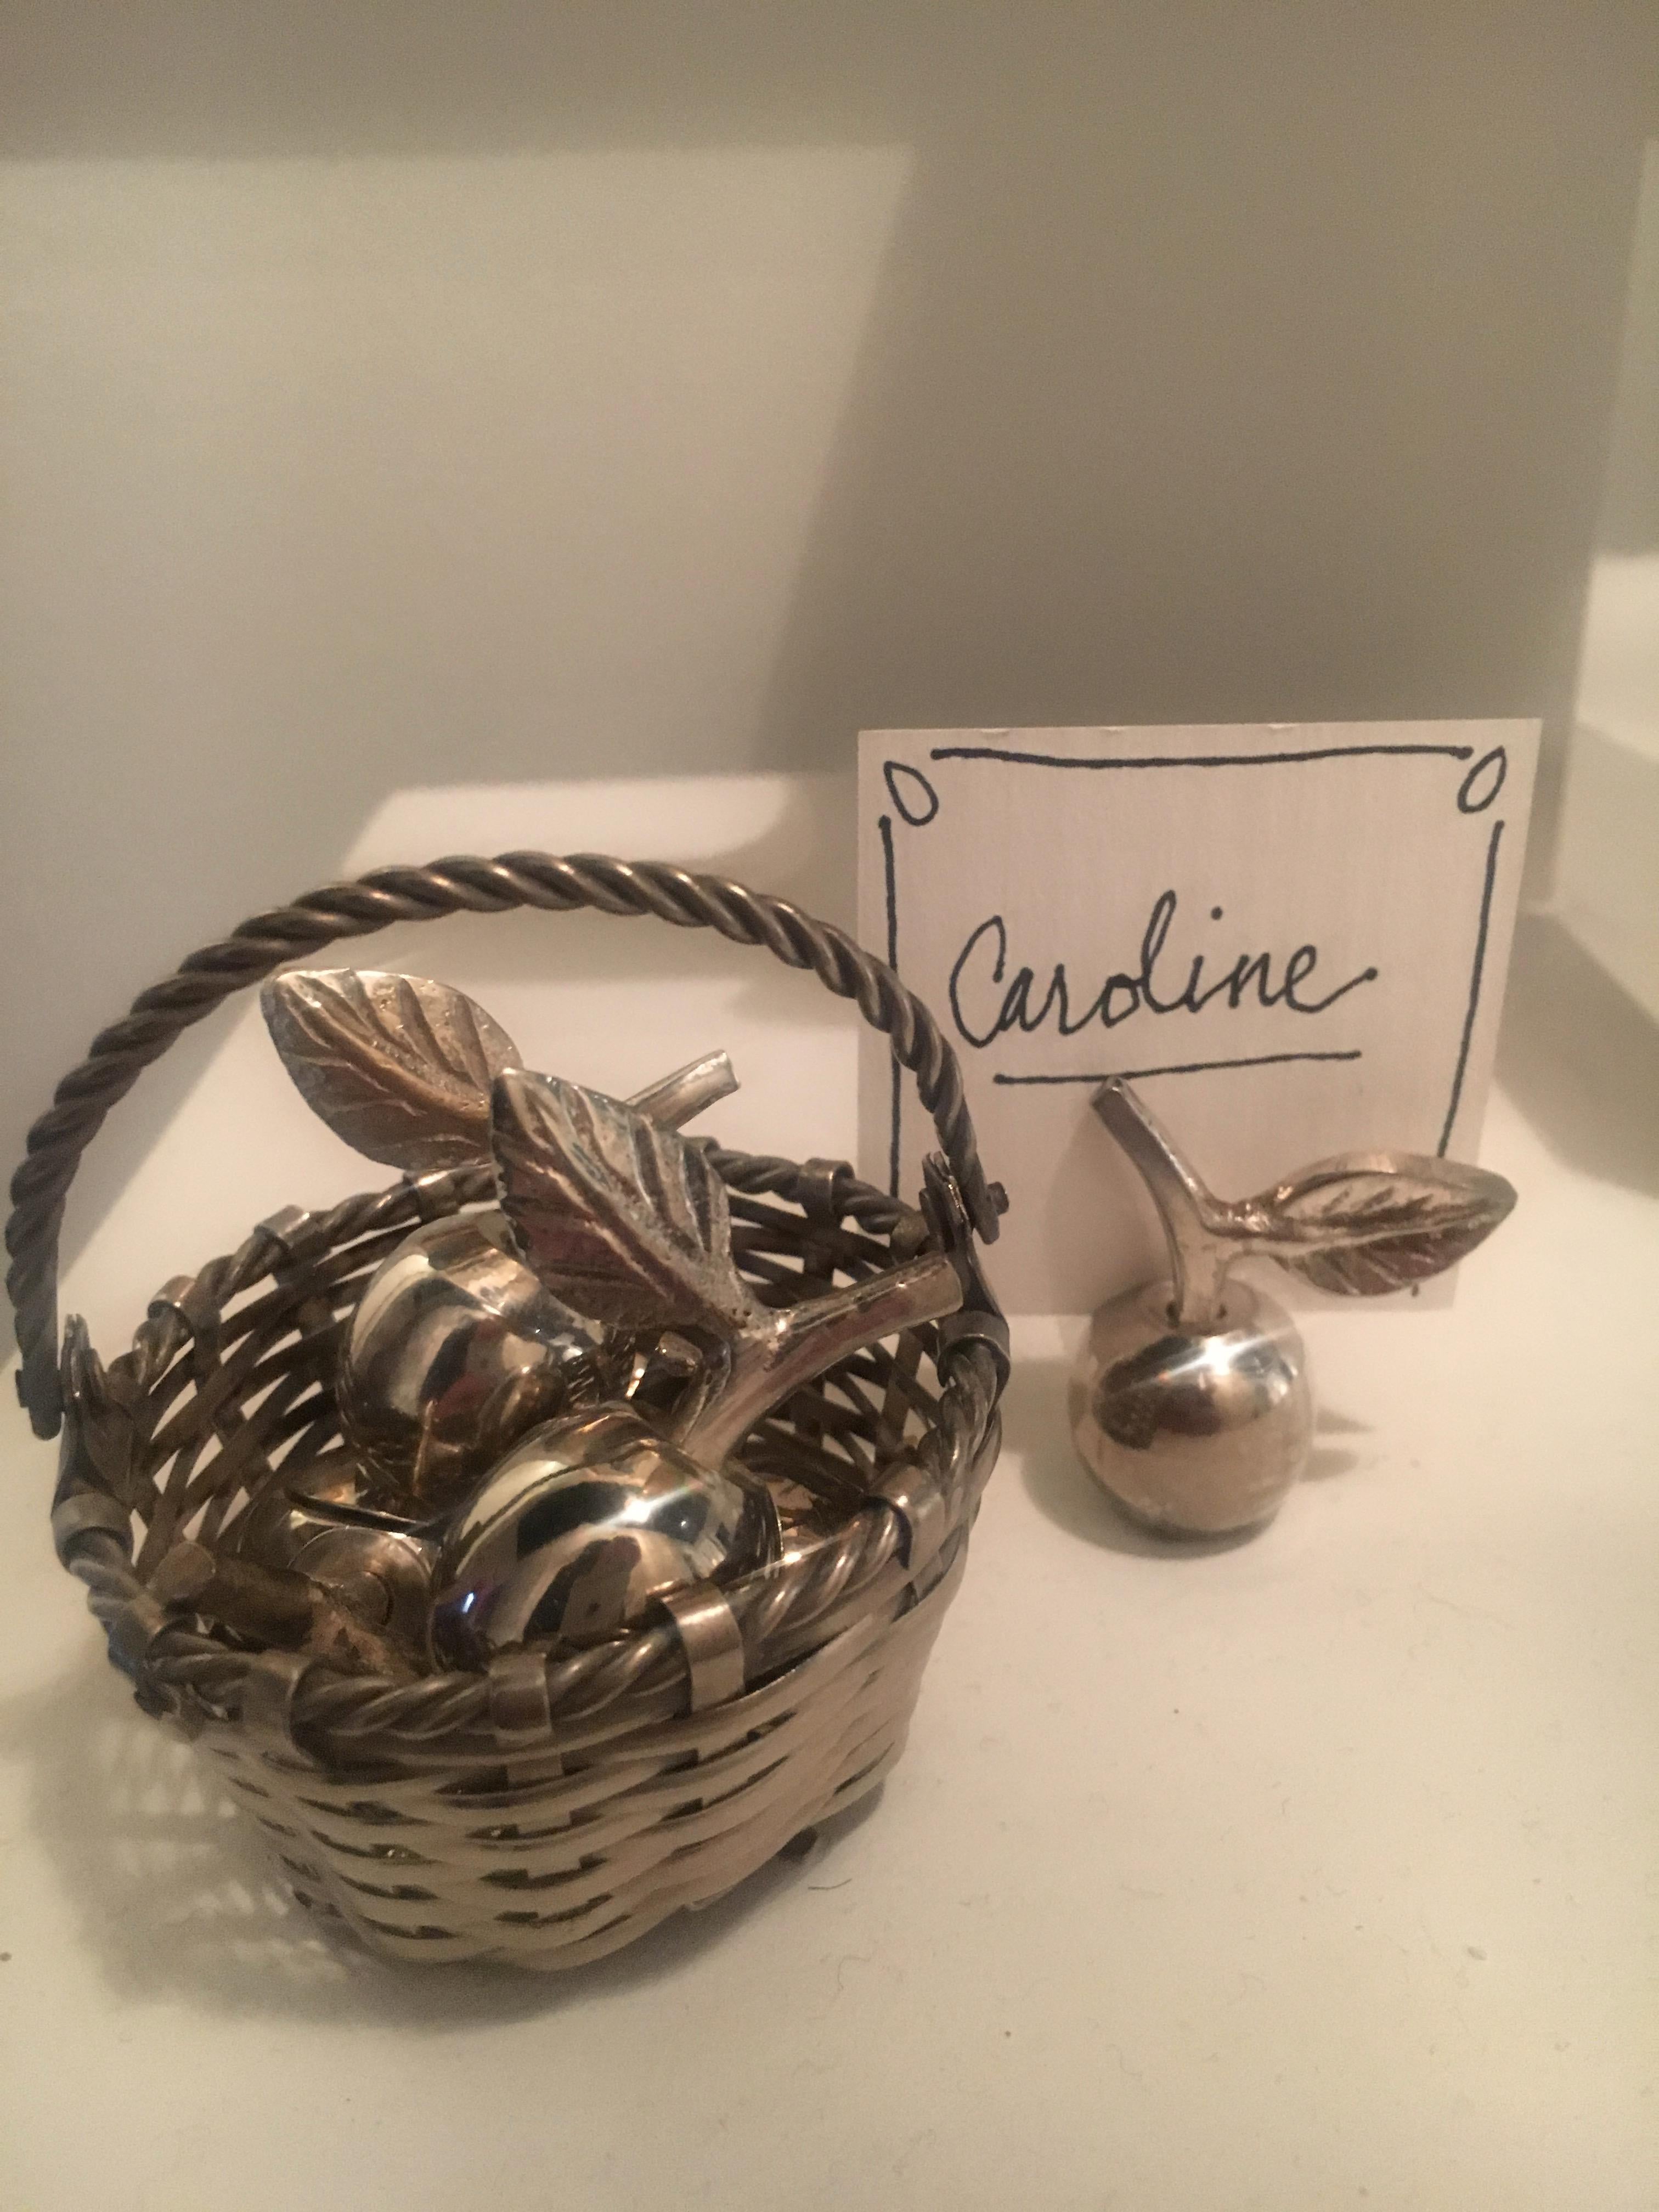 Six silver plate apple place card menu holders with woven basket - Perfect set for the host with a lovely theme. So special they can be stored in their own special place in a handsome woven basket! 

Measures: Basket is 2